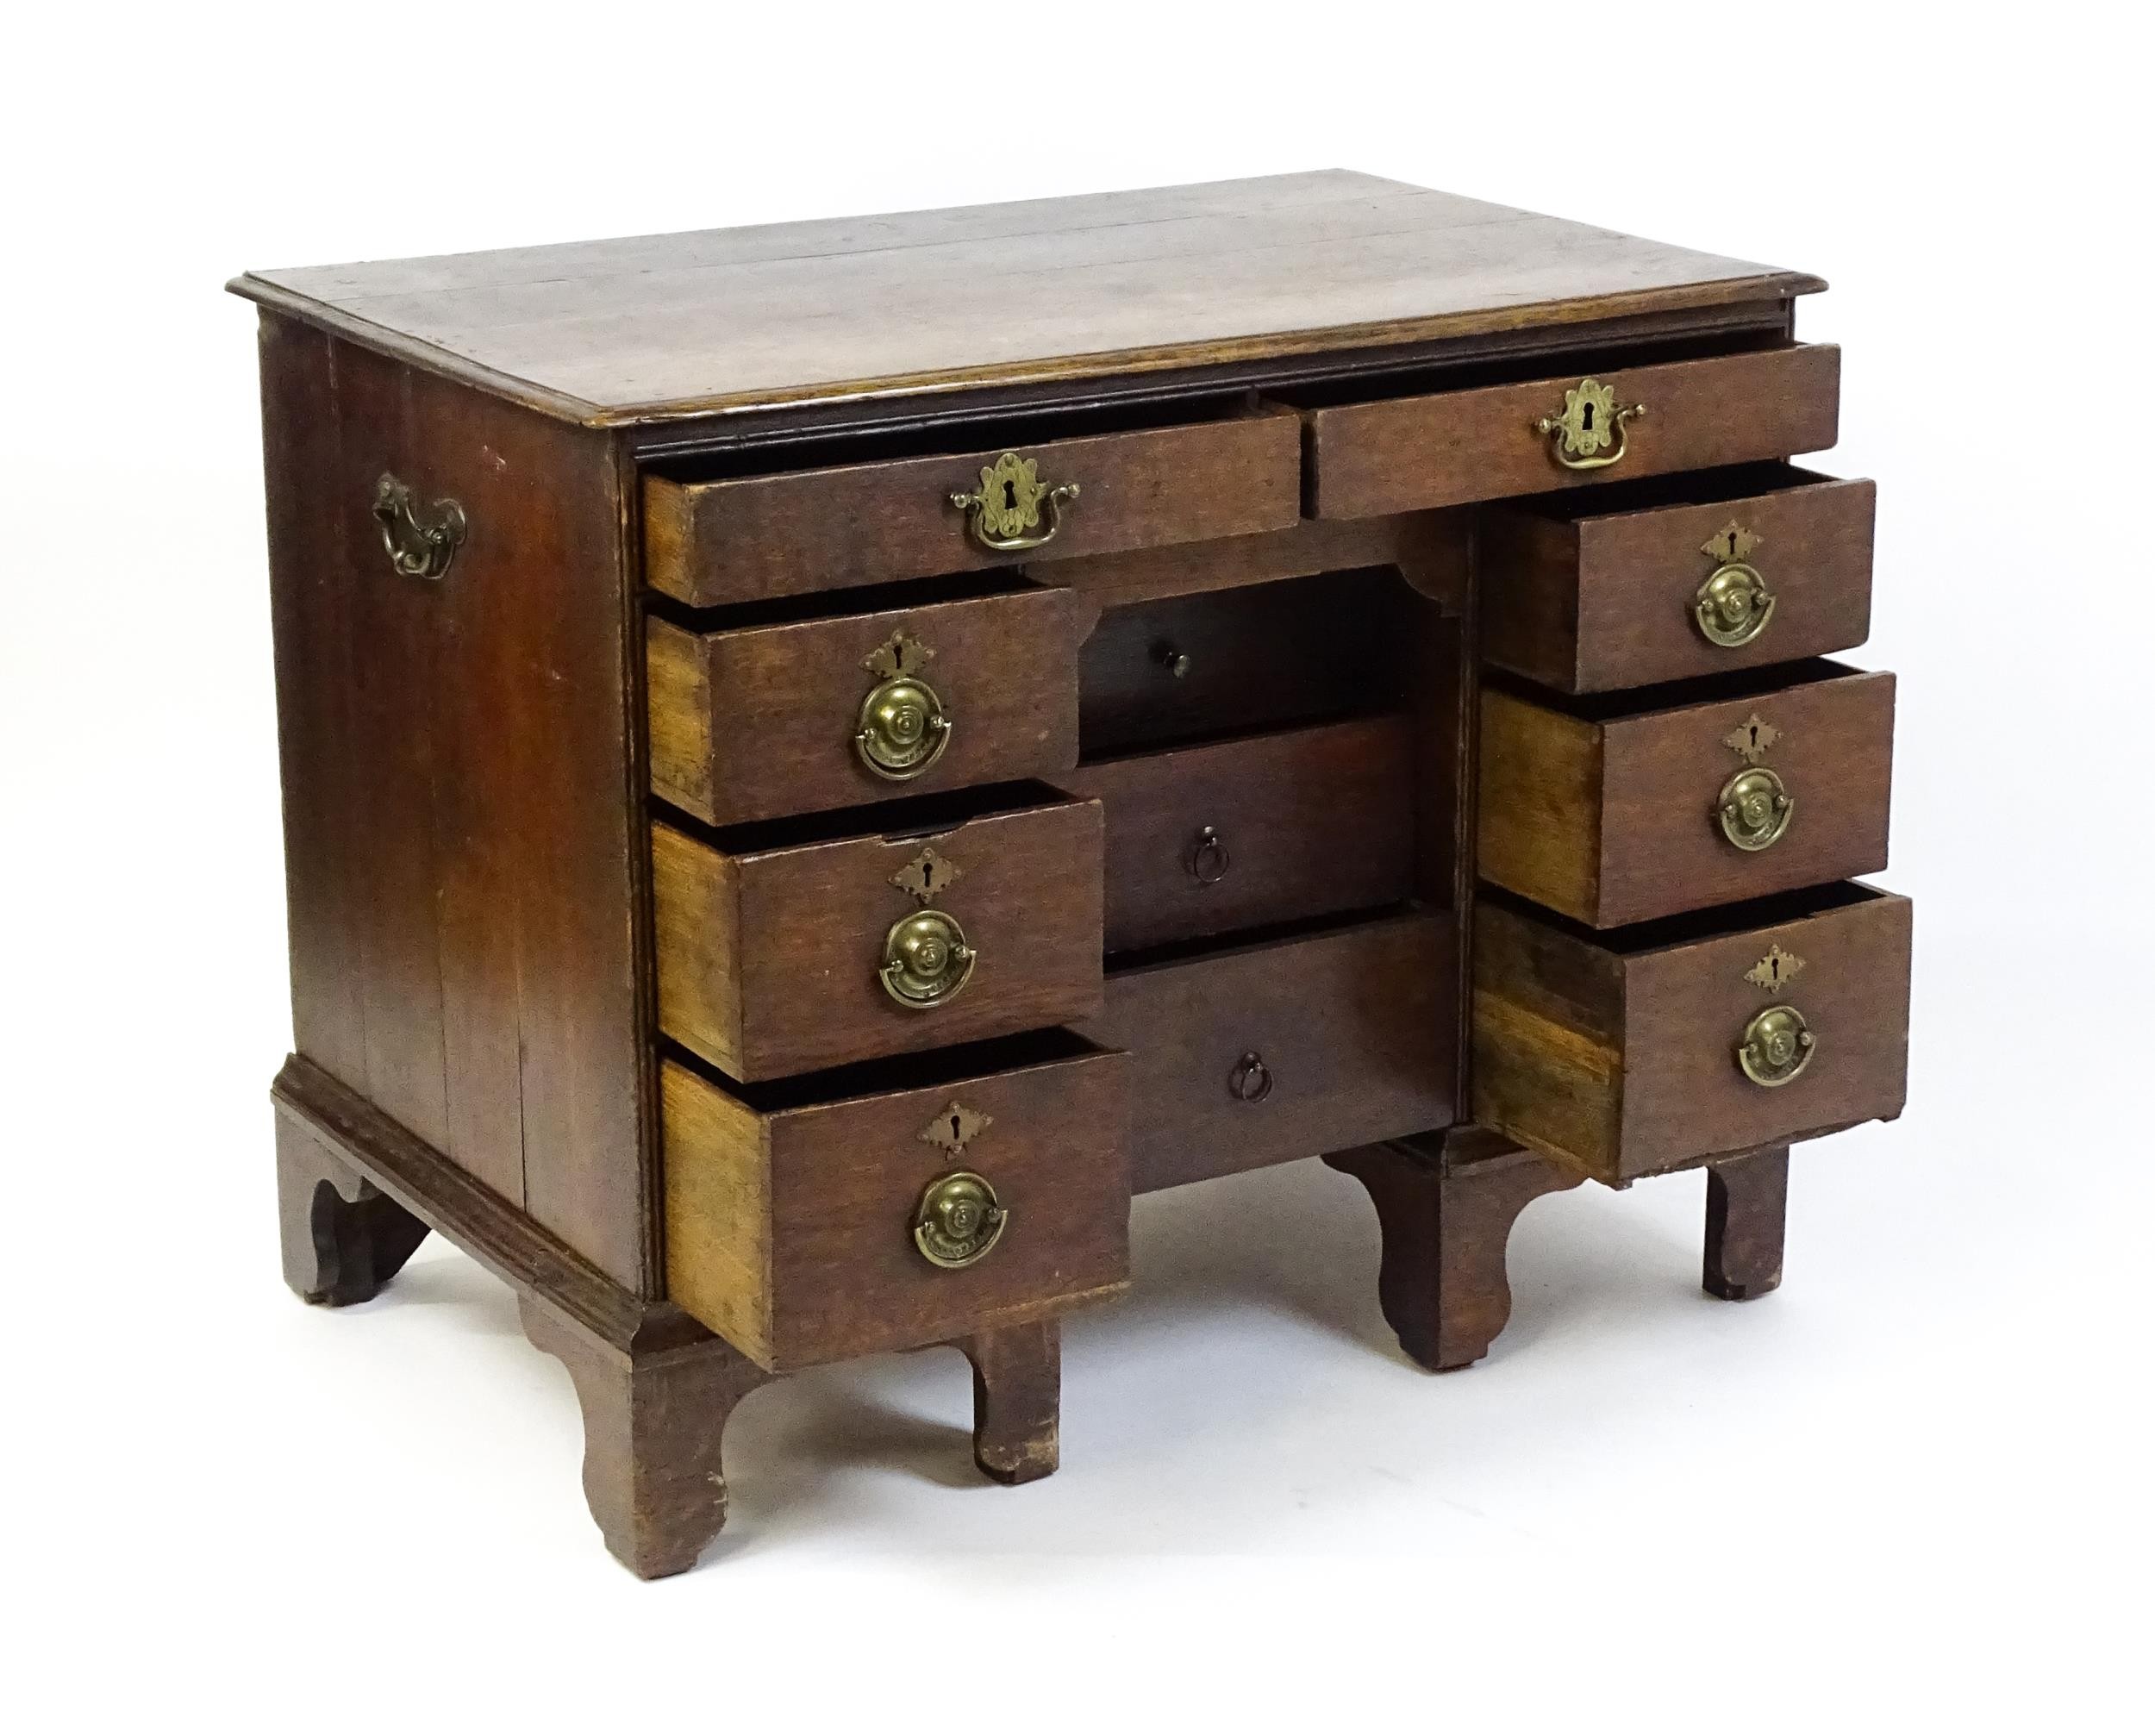 An early / mid 18thC oak kneehole desk with a moulded top above two short drawers and two banks of - Image 2 of 10